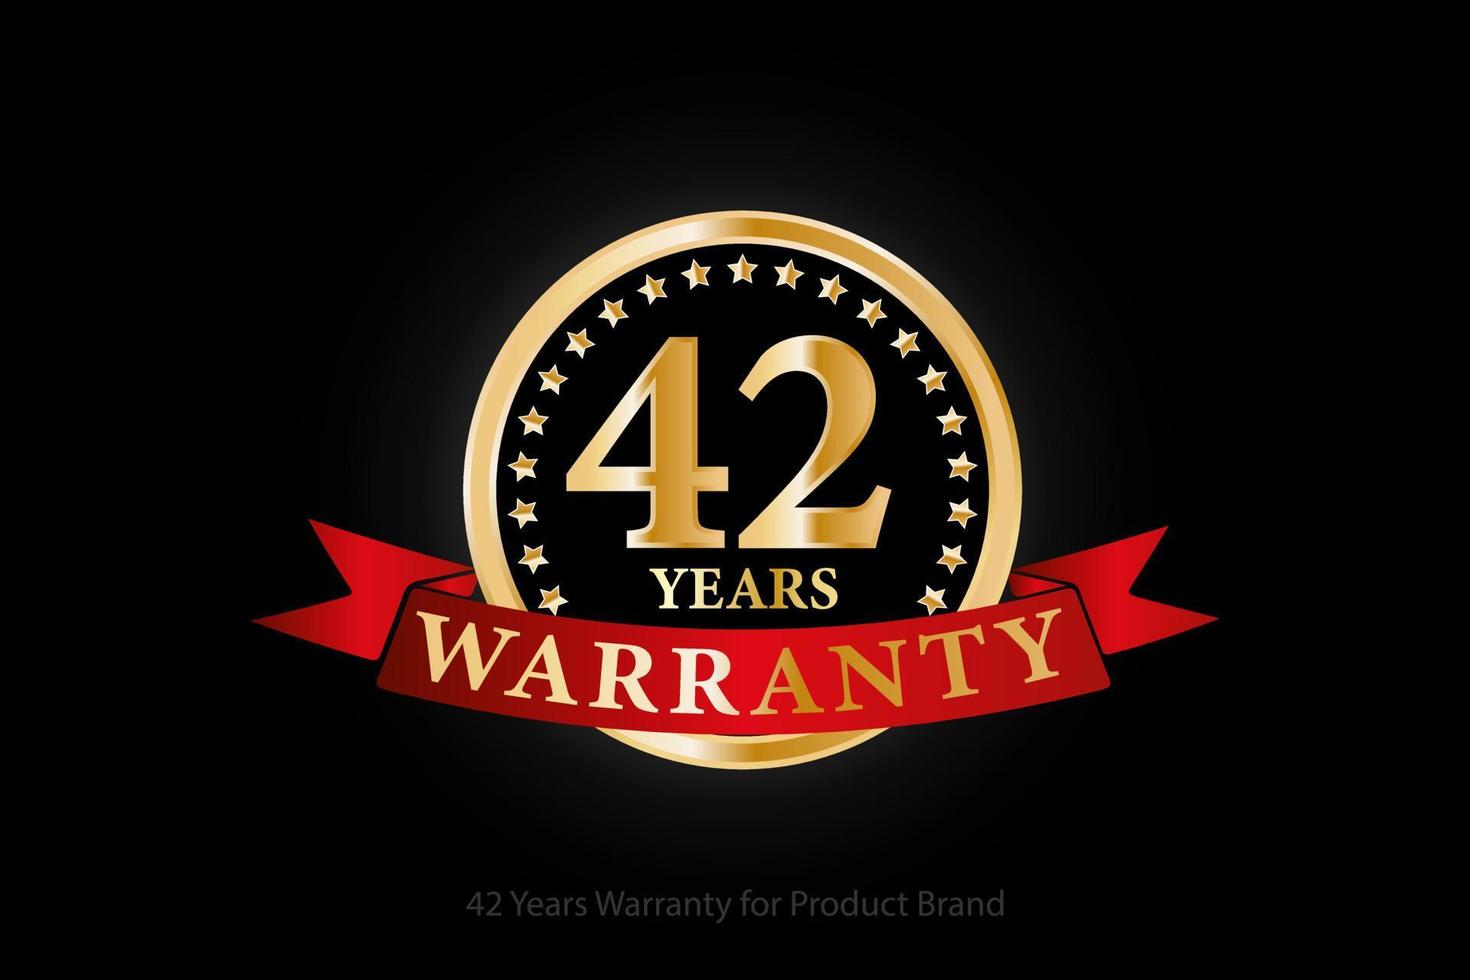 42 years golden warranty logo with ring and red ribbon isolated on black background, vector design for product warranty, guarantee, service, corporate, and your business.